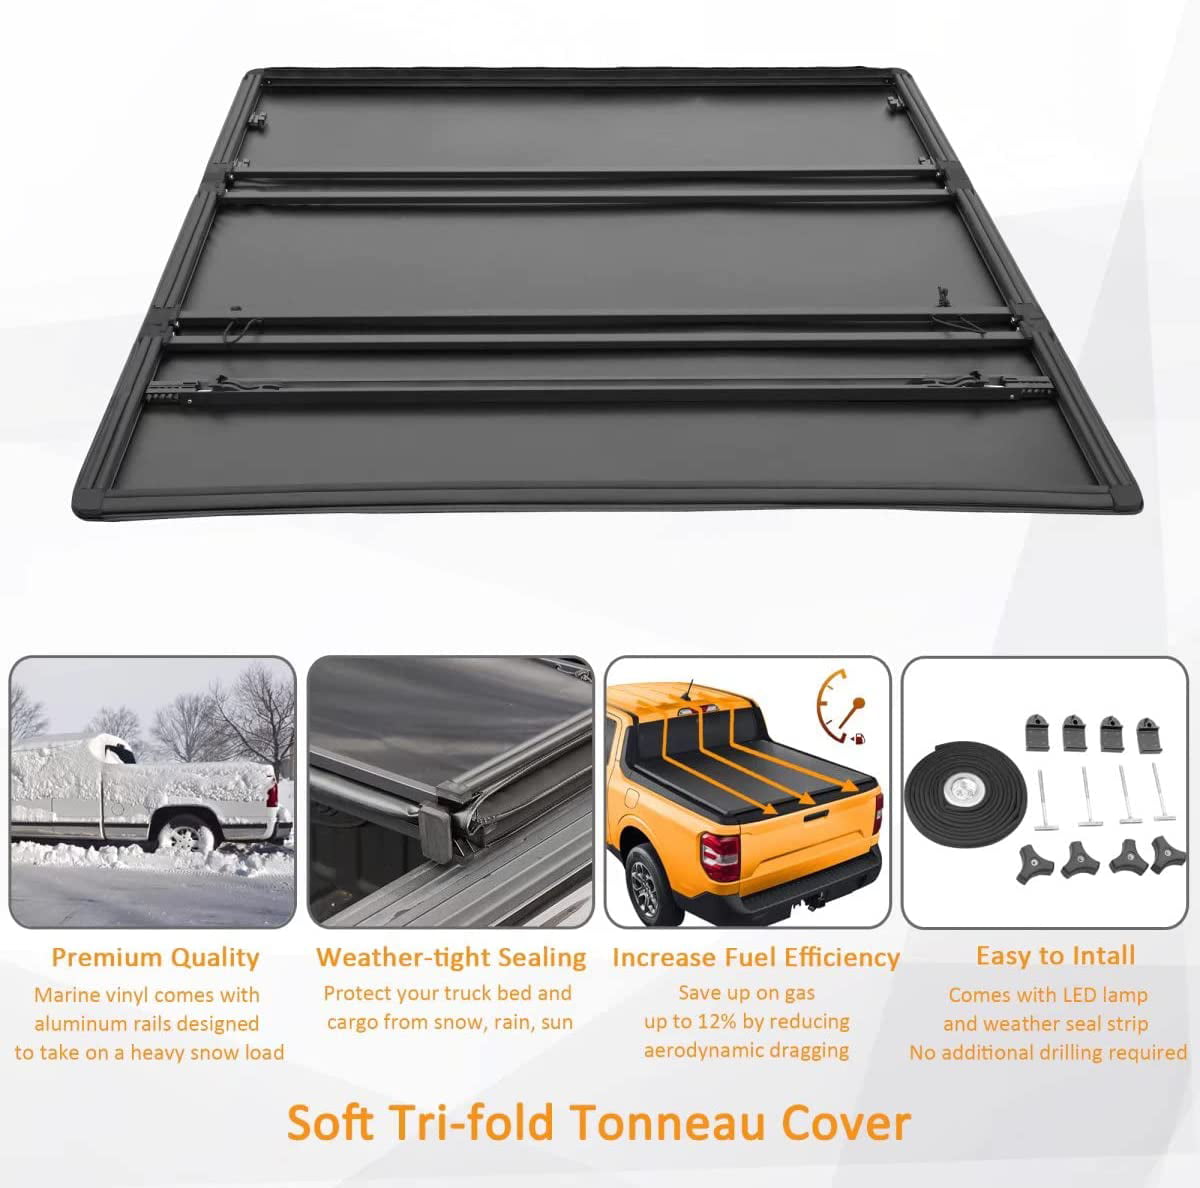 Kikito Soft Roll-Up Tonneau Cover Truck Bed for 2022-2023 Maverick 4.6FT (54.4in) Bed